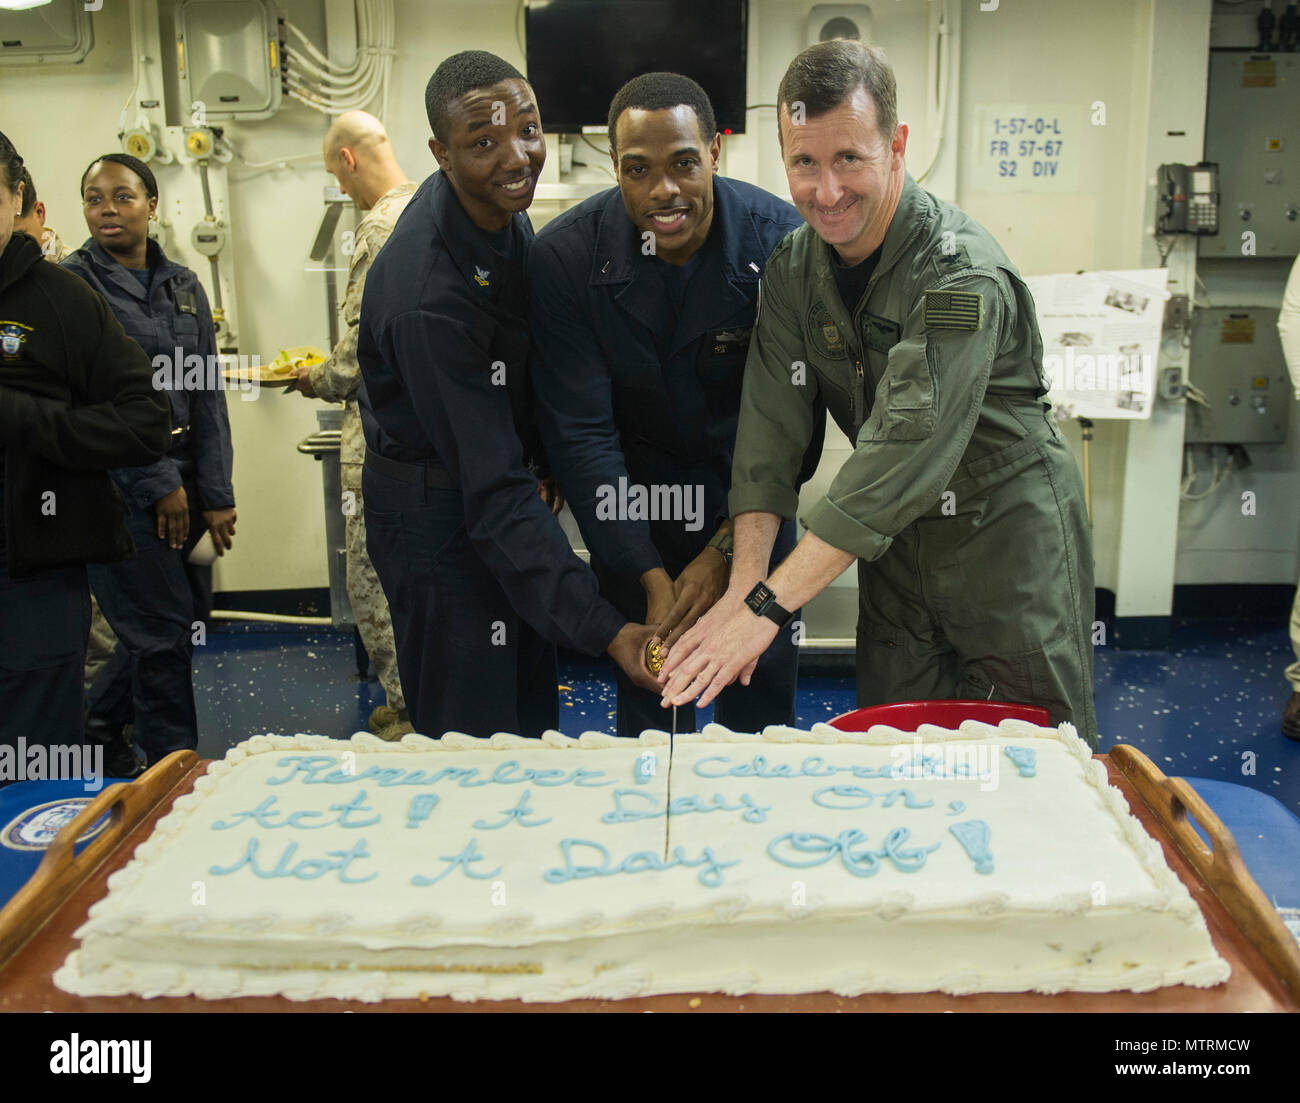 170117-N-LI768-143 ARABIAN SEA (Jan. 17, 2017) USS Makin Island (LHD 8)  Commanding Officer Capt. Mark A. Melson, right, is joined by Ship's  Serviceman 2nd Class Zemario Sheppard, from Sacramento, Calif., left, and